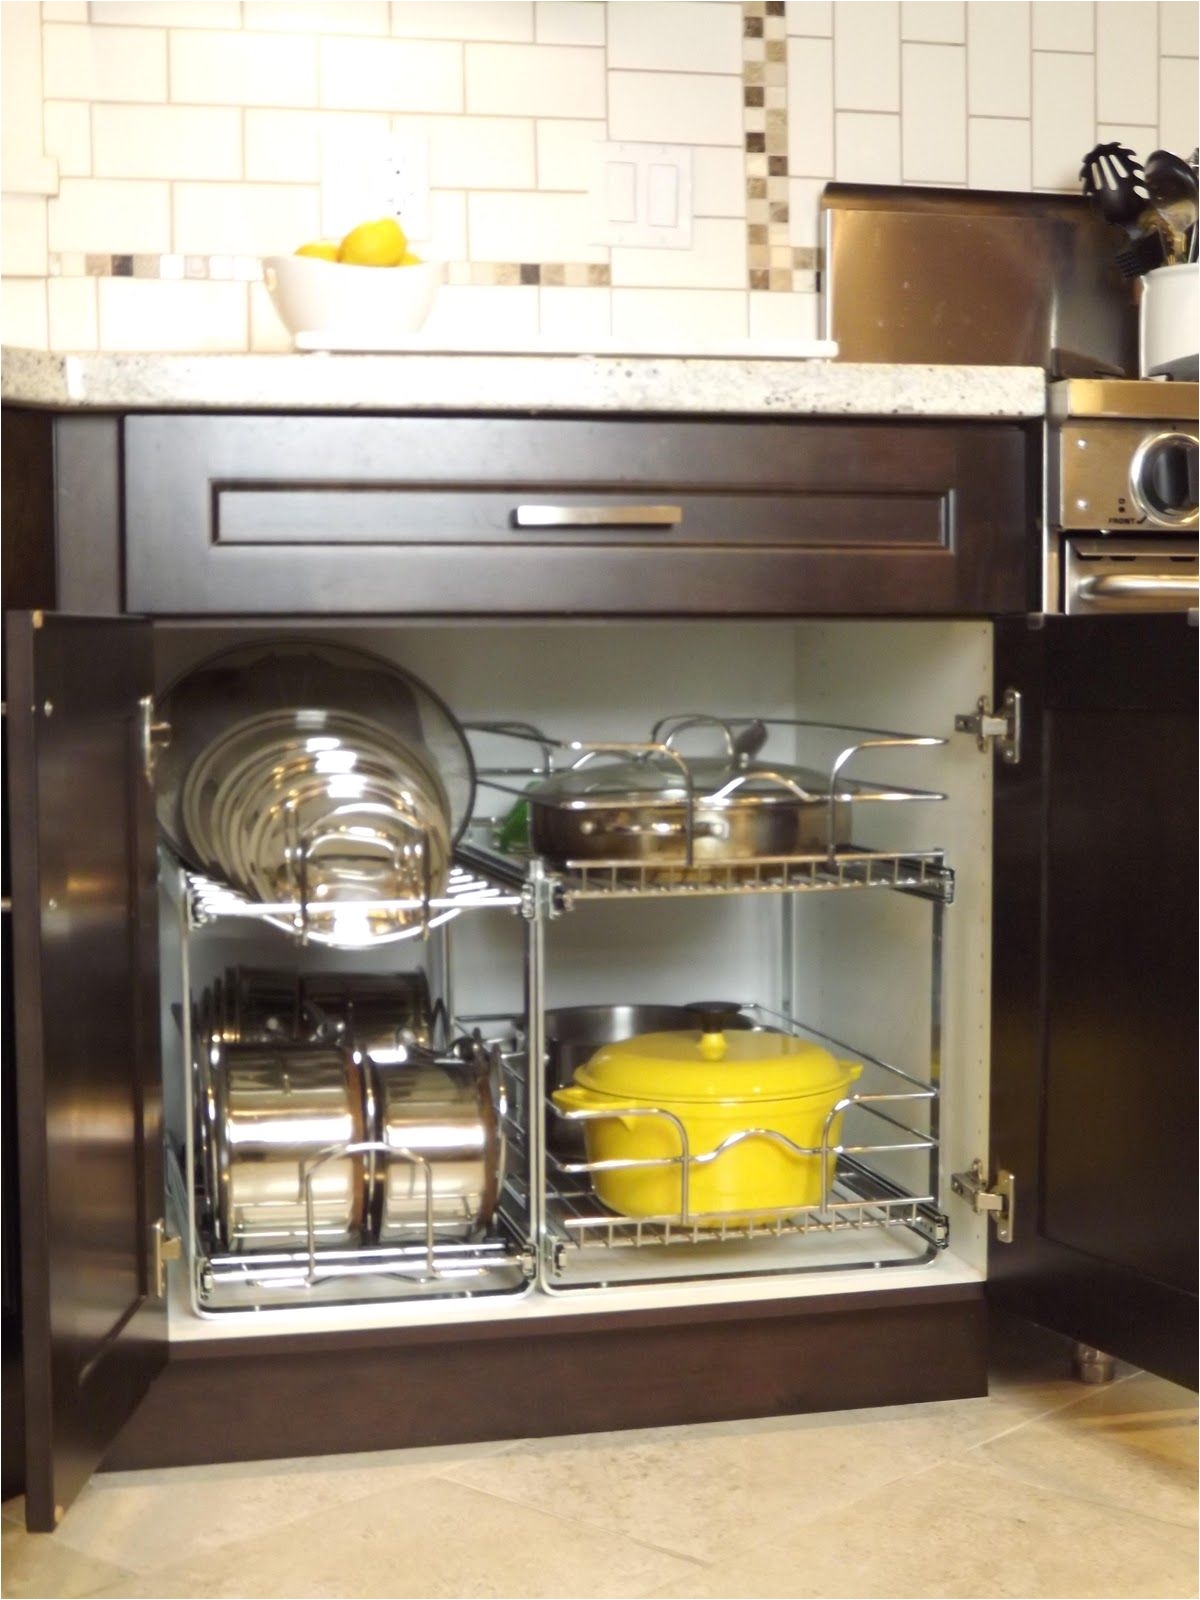 good under stove storage design for pots pans and lids 15 beautifully organized kitchen cabinets and tips we learned from each